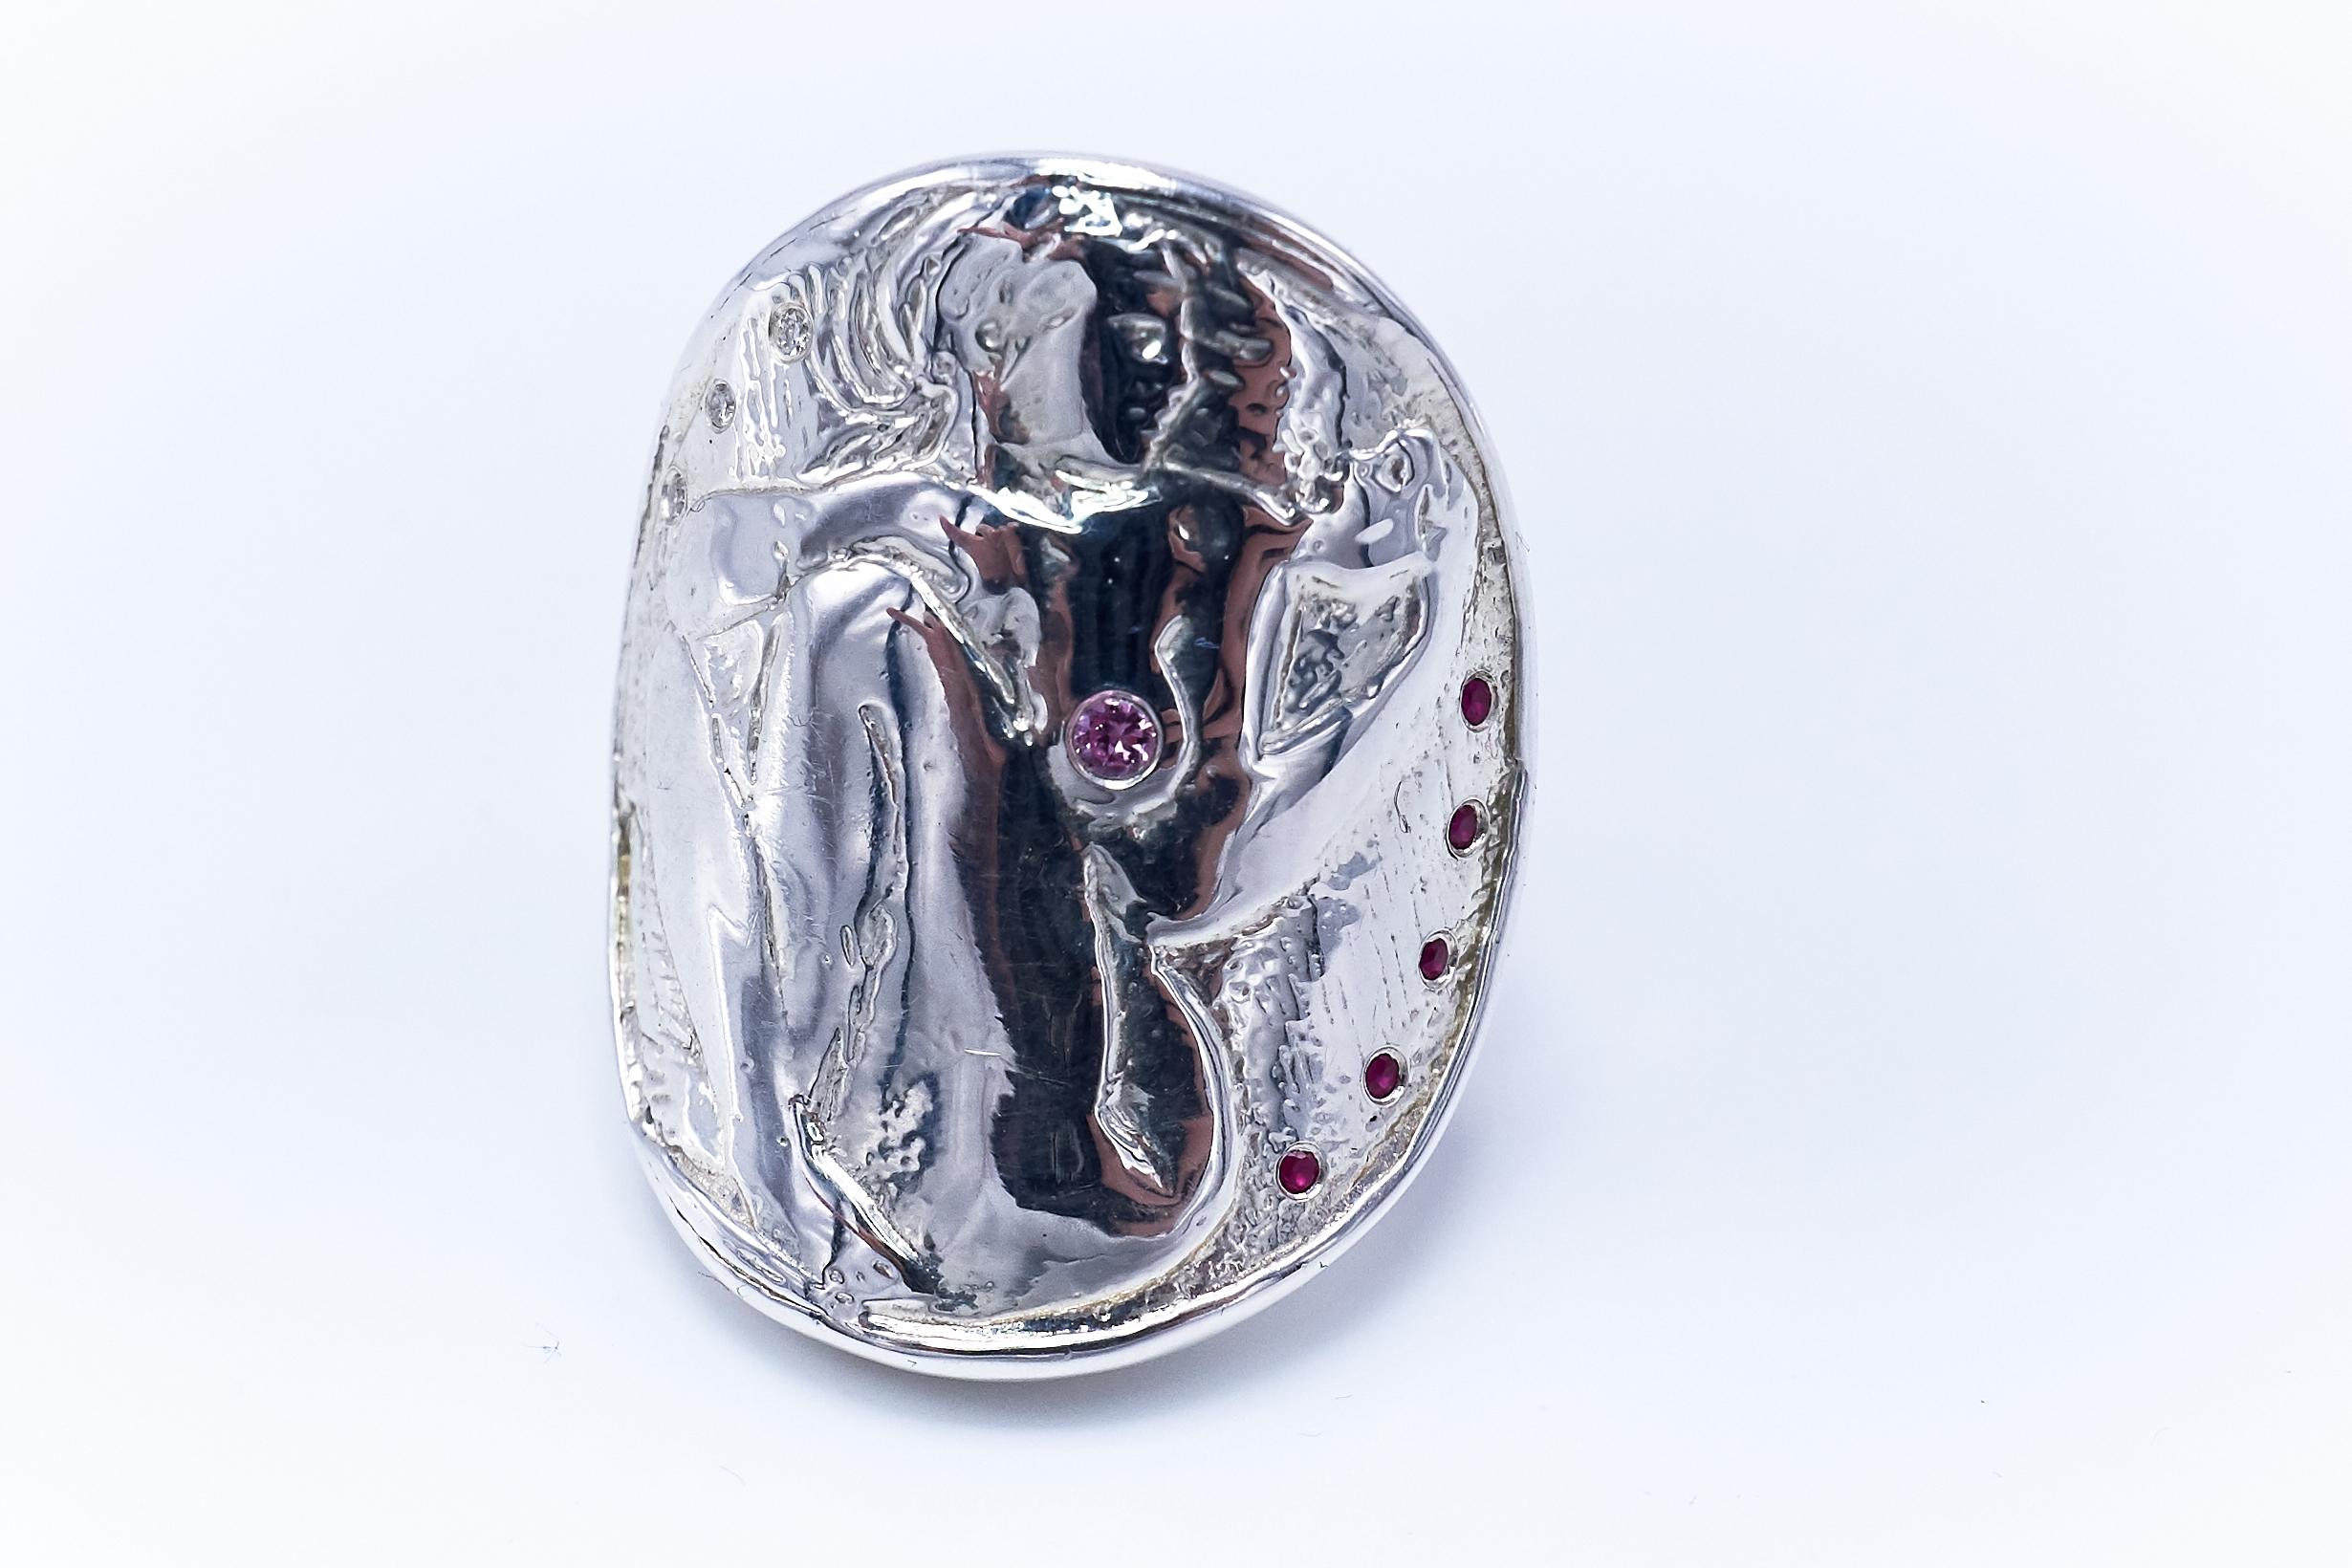 Cocktail Statement Coin Ring Woman 3 White Diamond 1 Ruby 5 Pink Sapphire J Dauphin

J DAUPHIN 